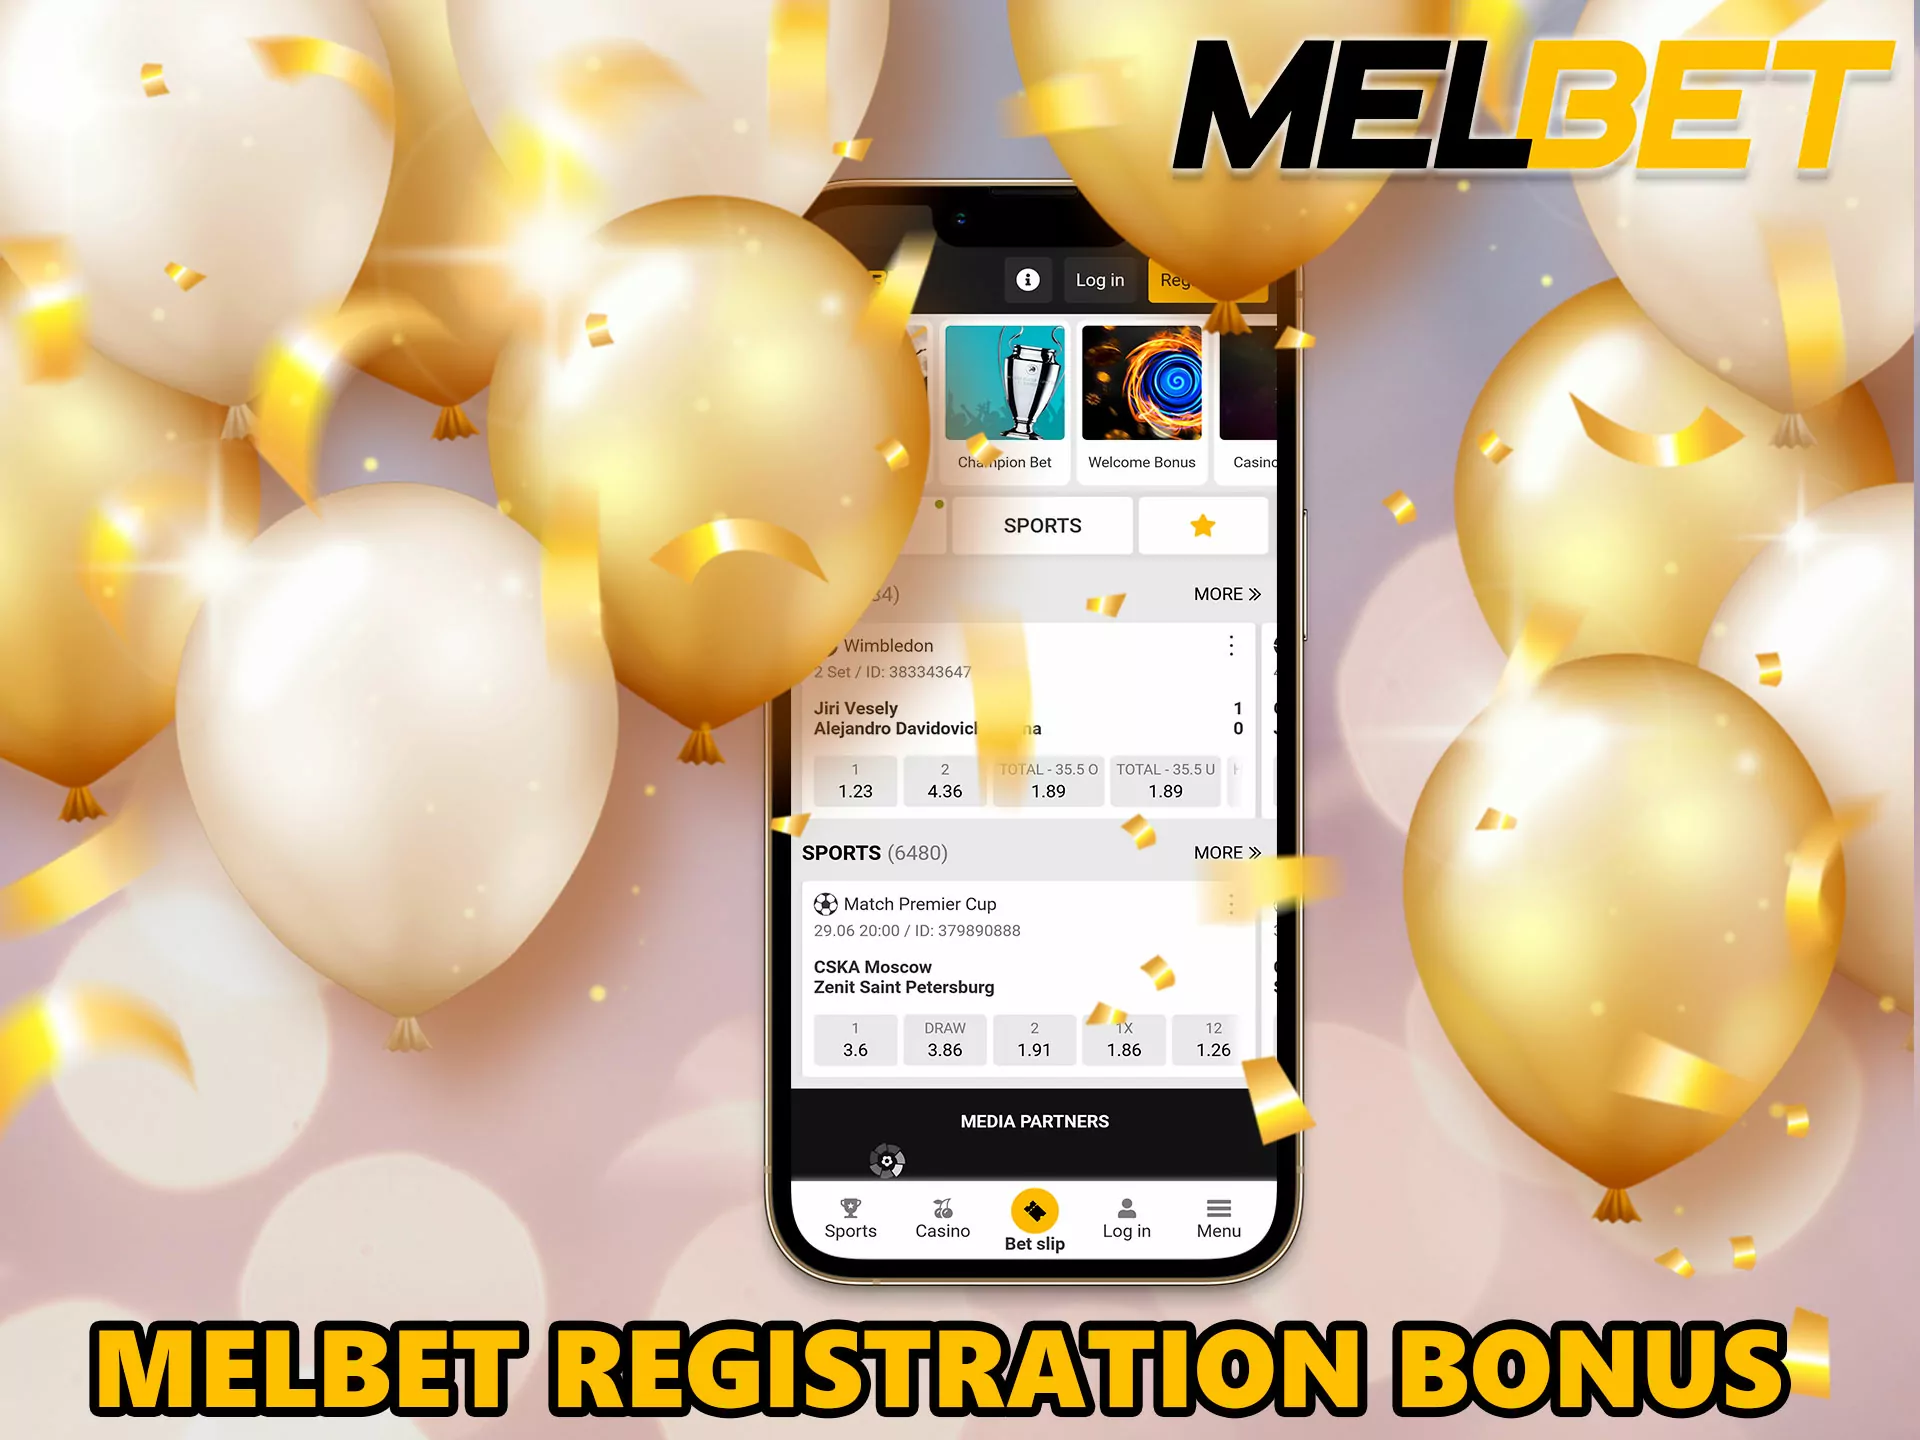 Several bonuses are available to Melbet players at once, let's find out more about them.